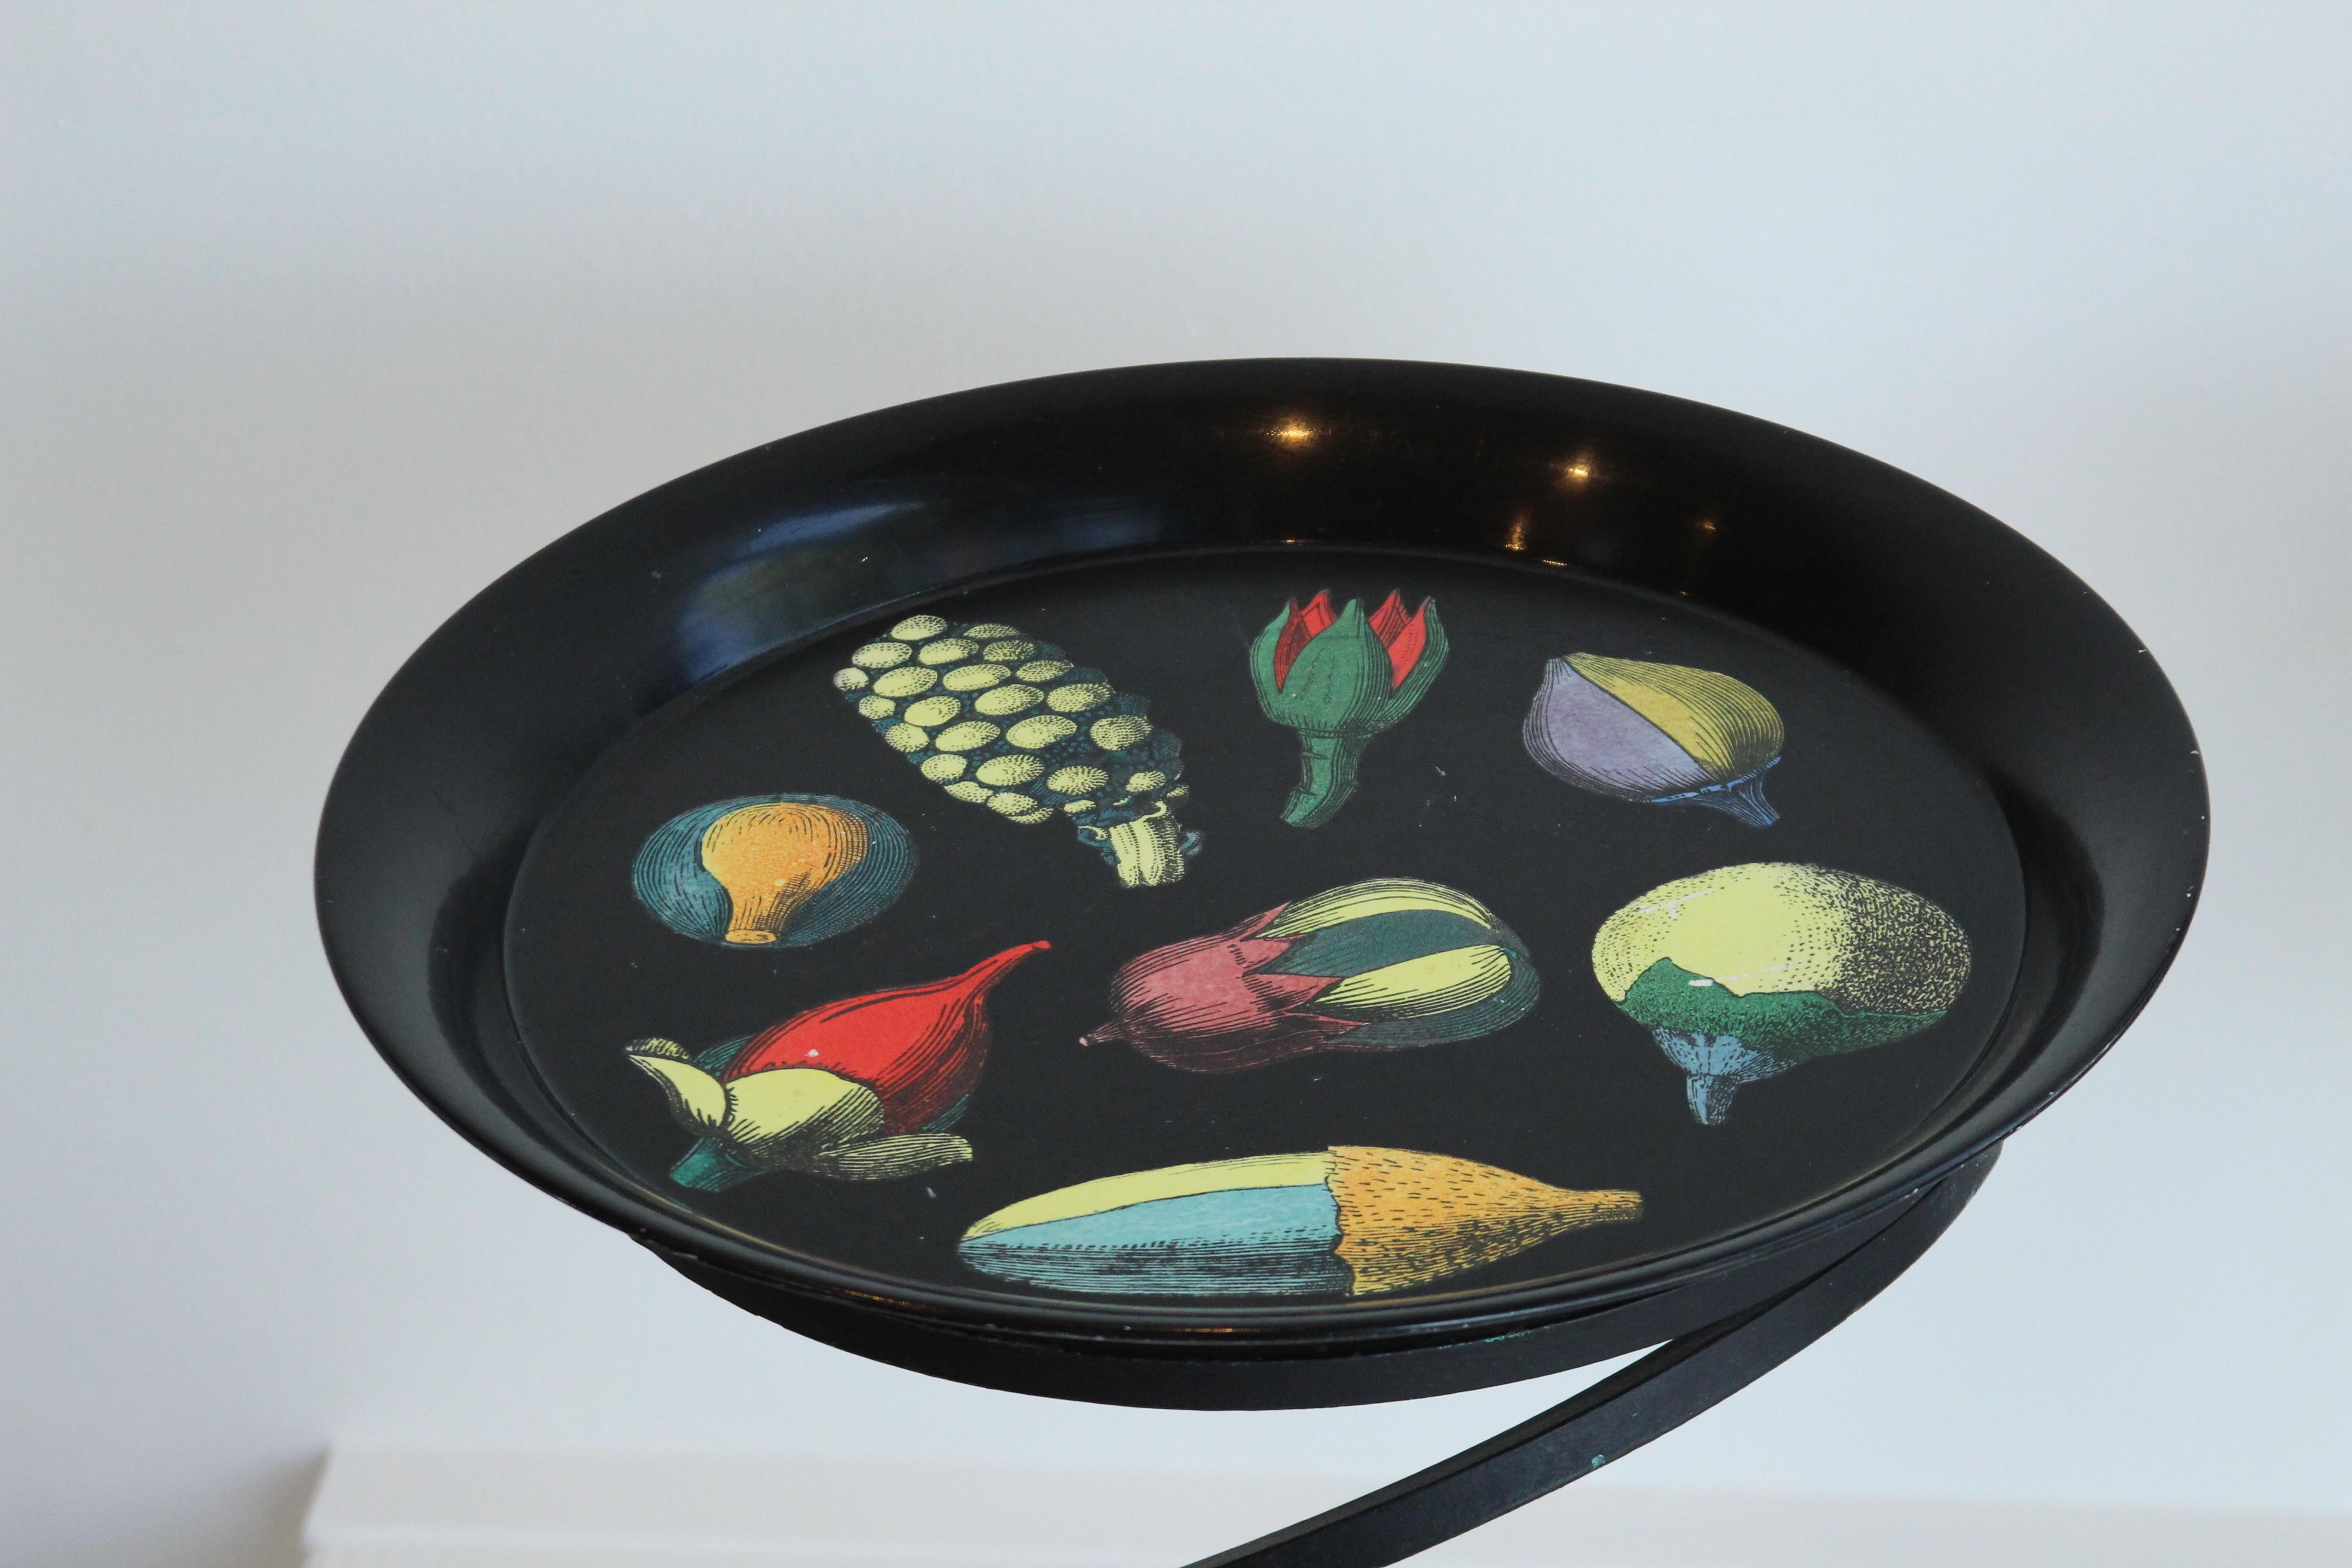 Black lacquered metal tray with hand painted images of squashes, pumpkins, and gourds, made in the 1950s by the workshop of Piero Fornasetti. The striking, vivid colors against the black background make this piece a real eye catcher. It would look